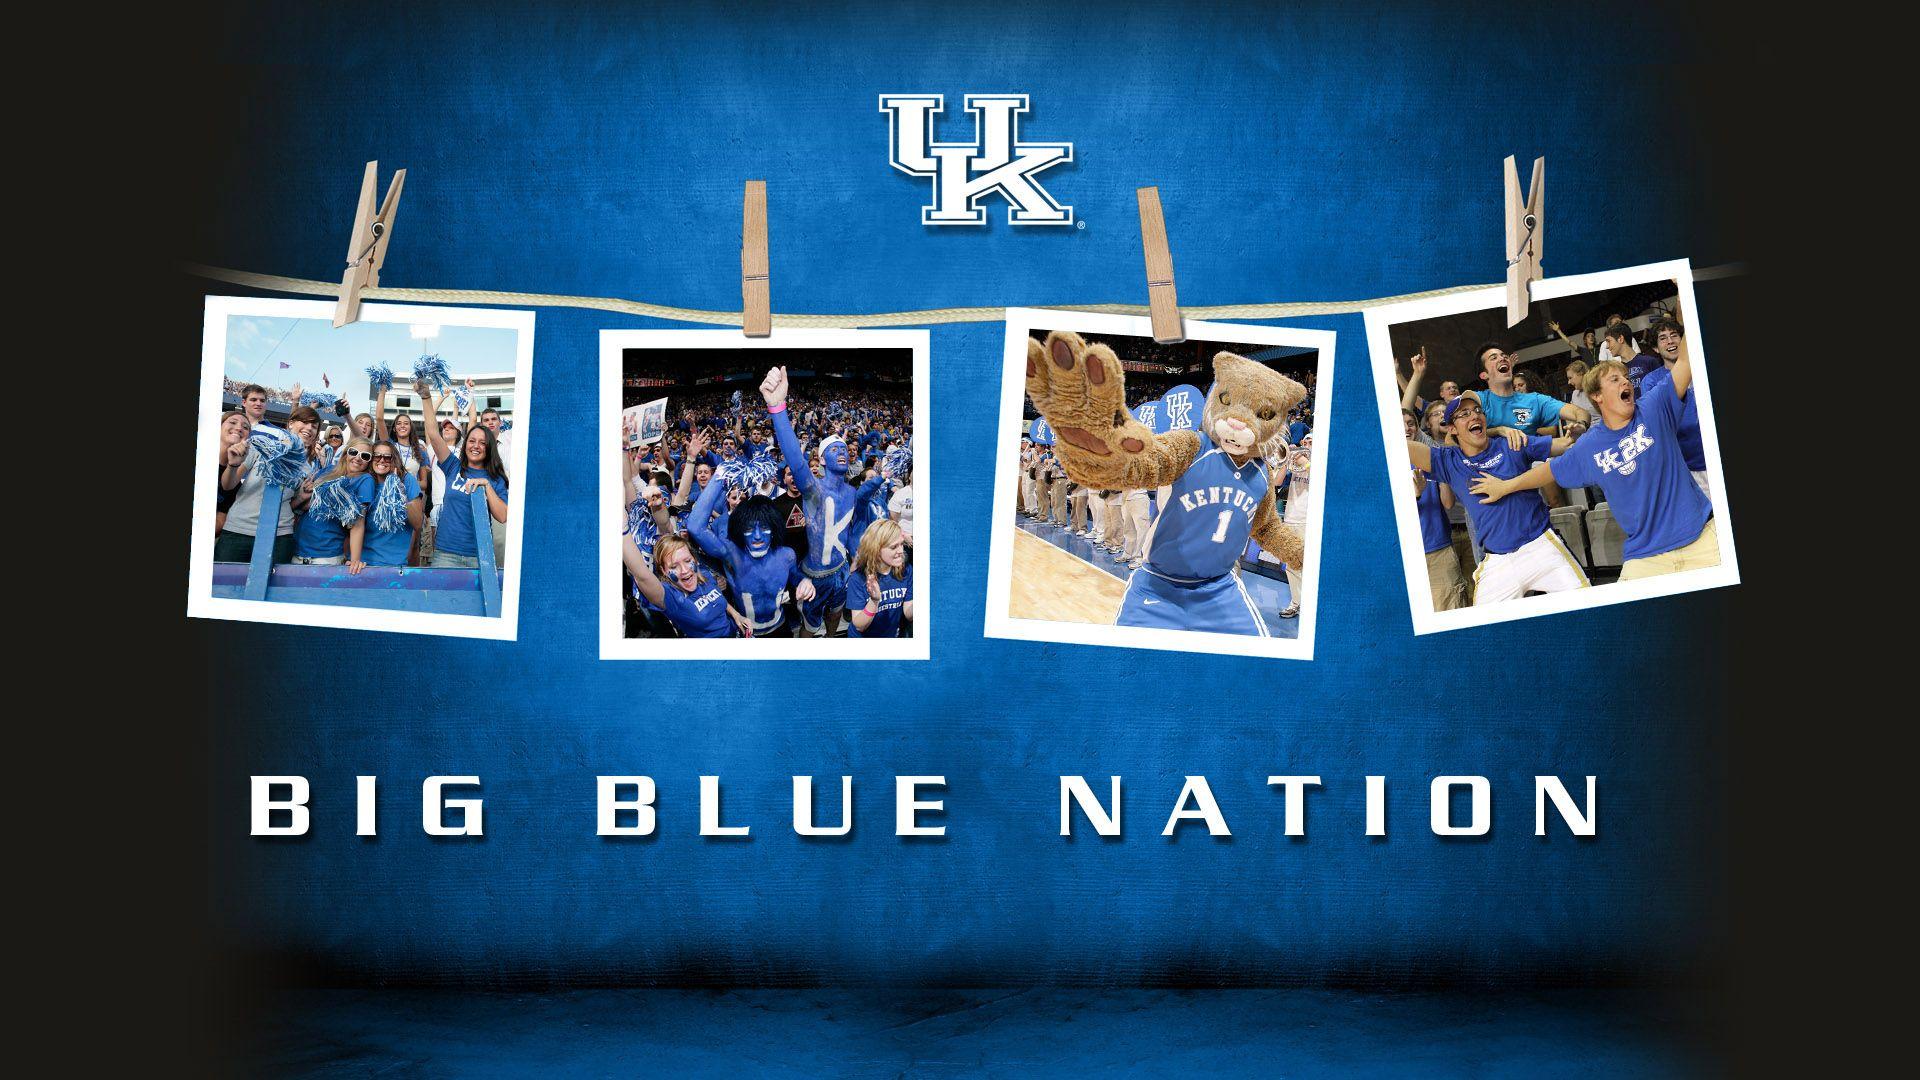 University of Kentucky Chrome Themes, iOS Wallpapers & Blogs for